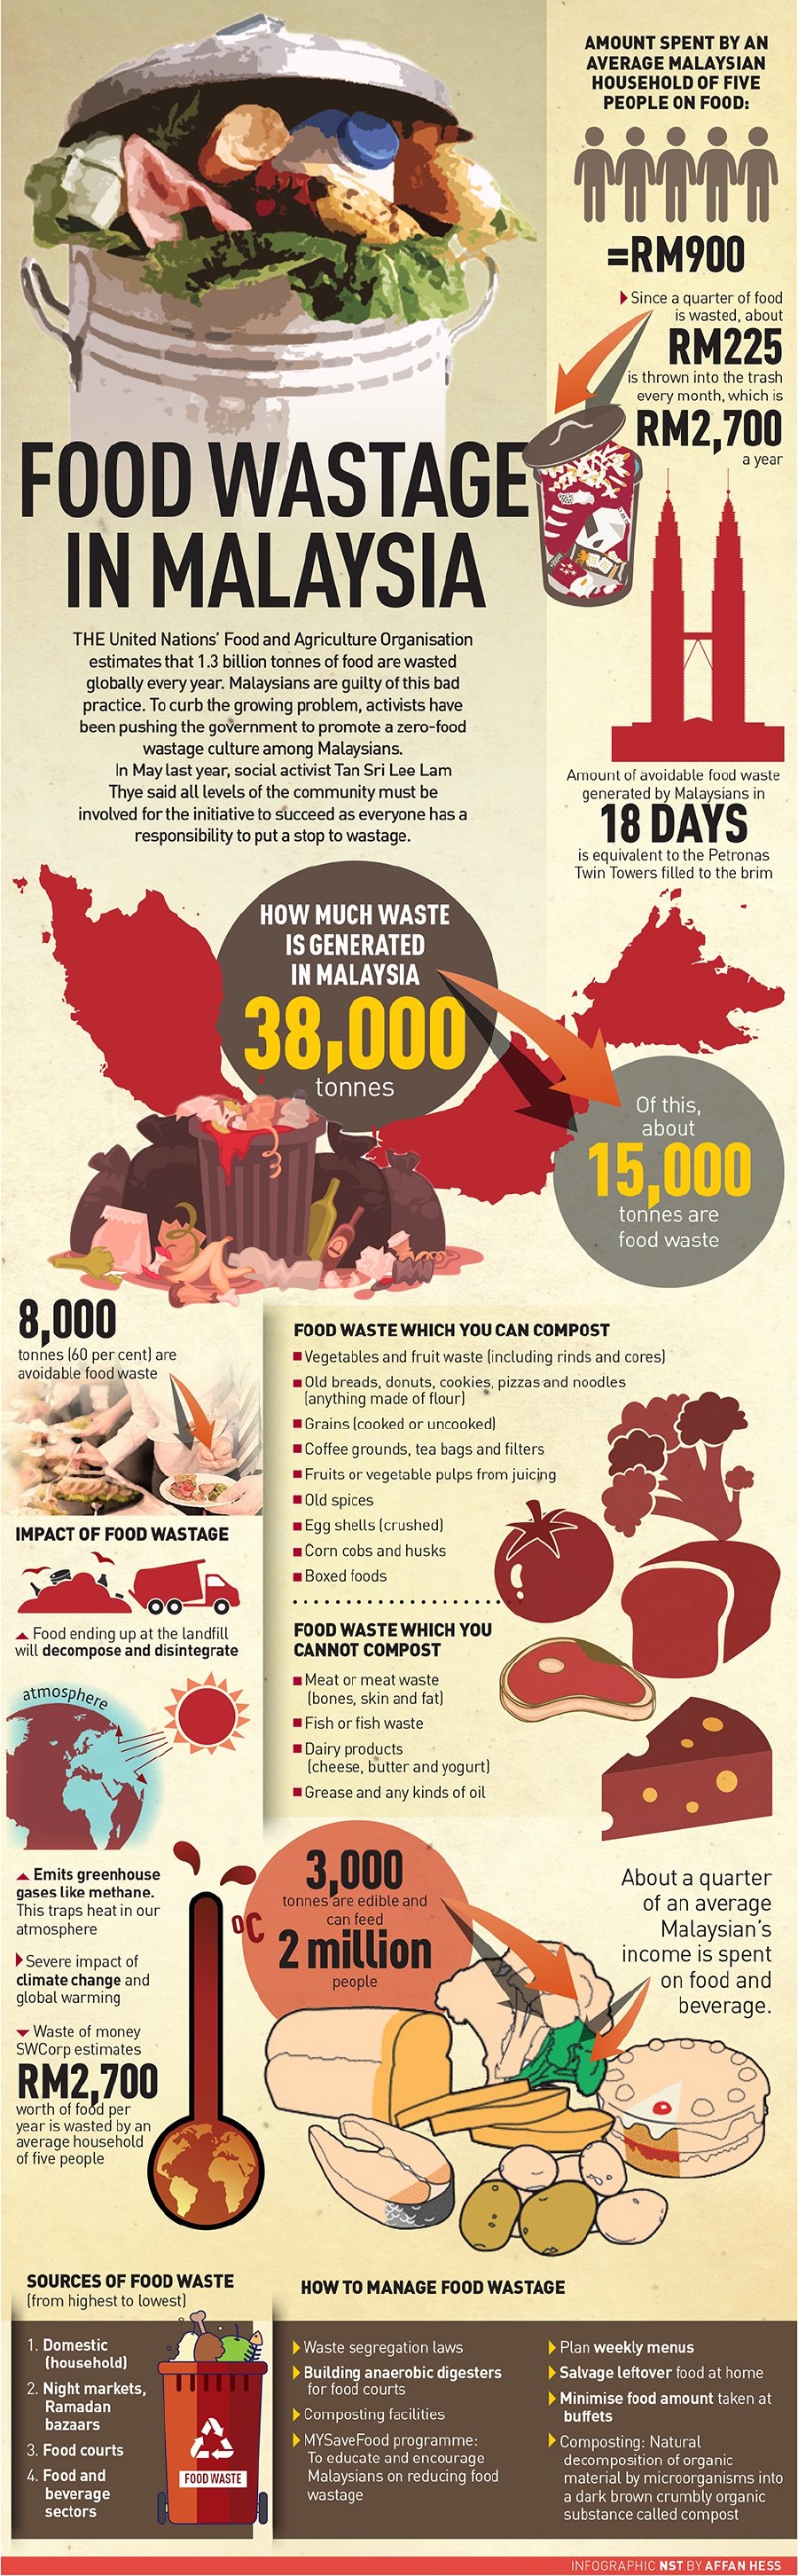 food wastage in malaysia